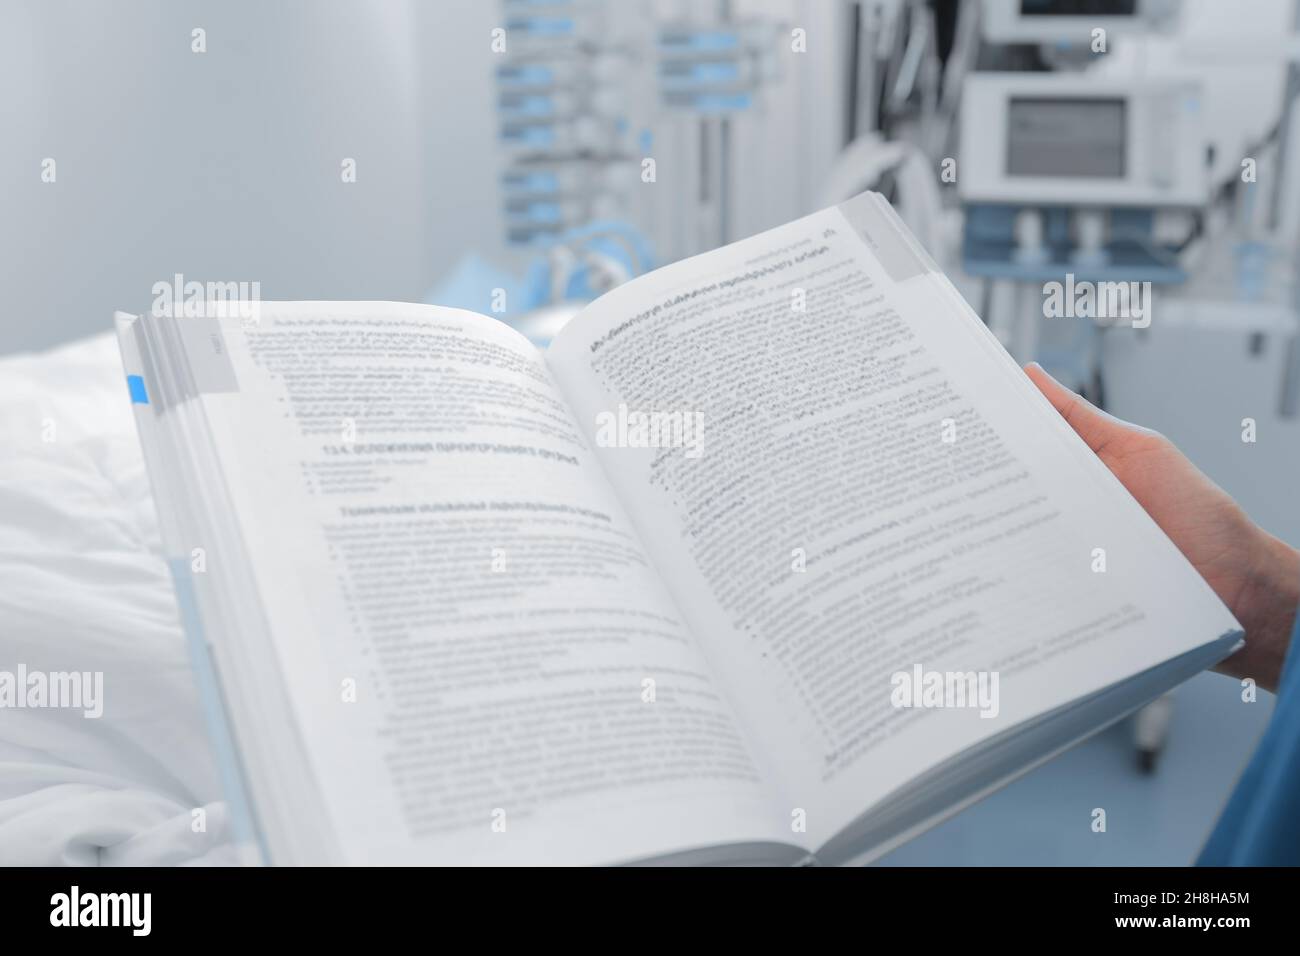 Medical worker reads book on his post at the patient's bedside. Stock Photo